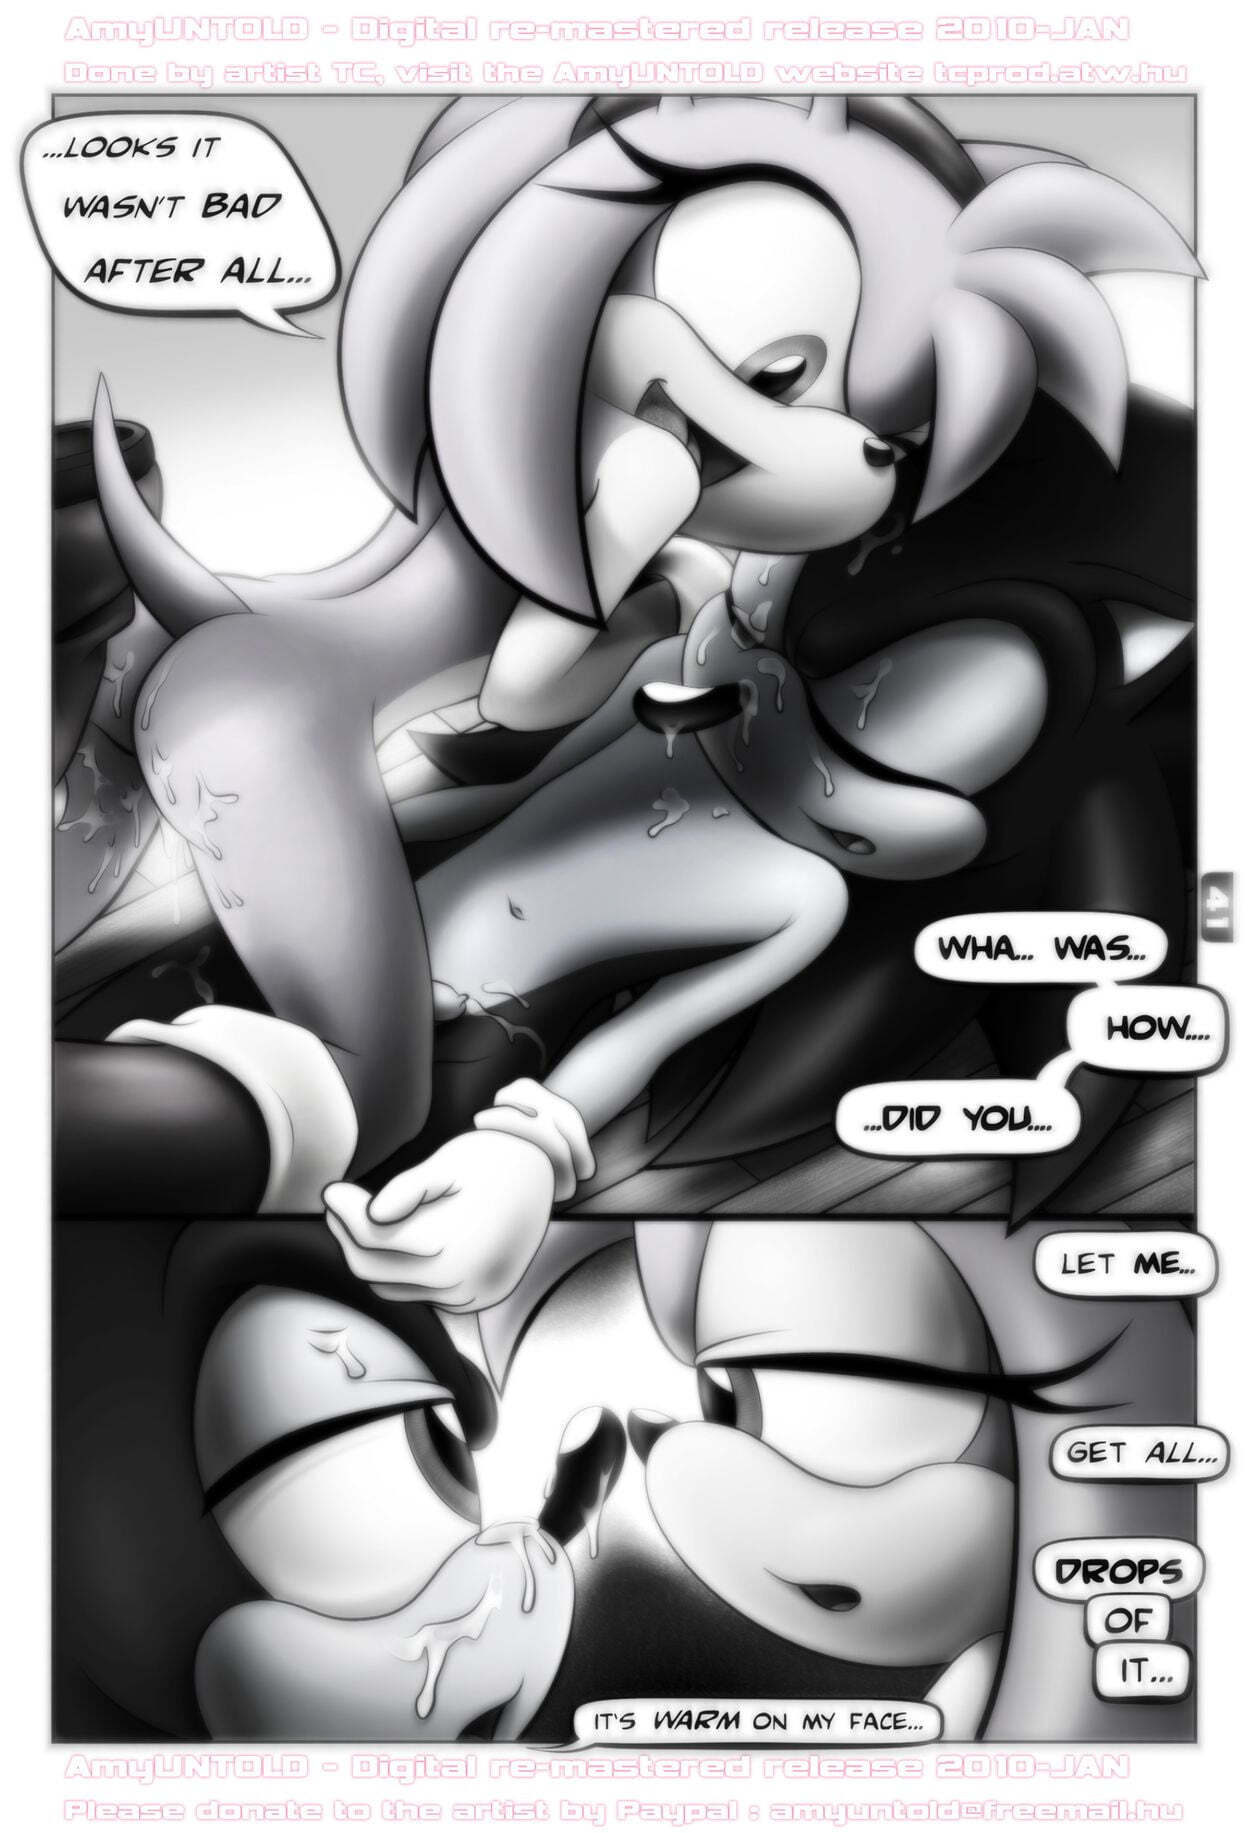 Amy Untold - Finally - Page 41